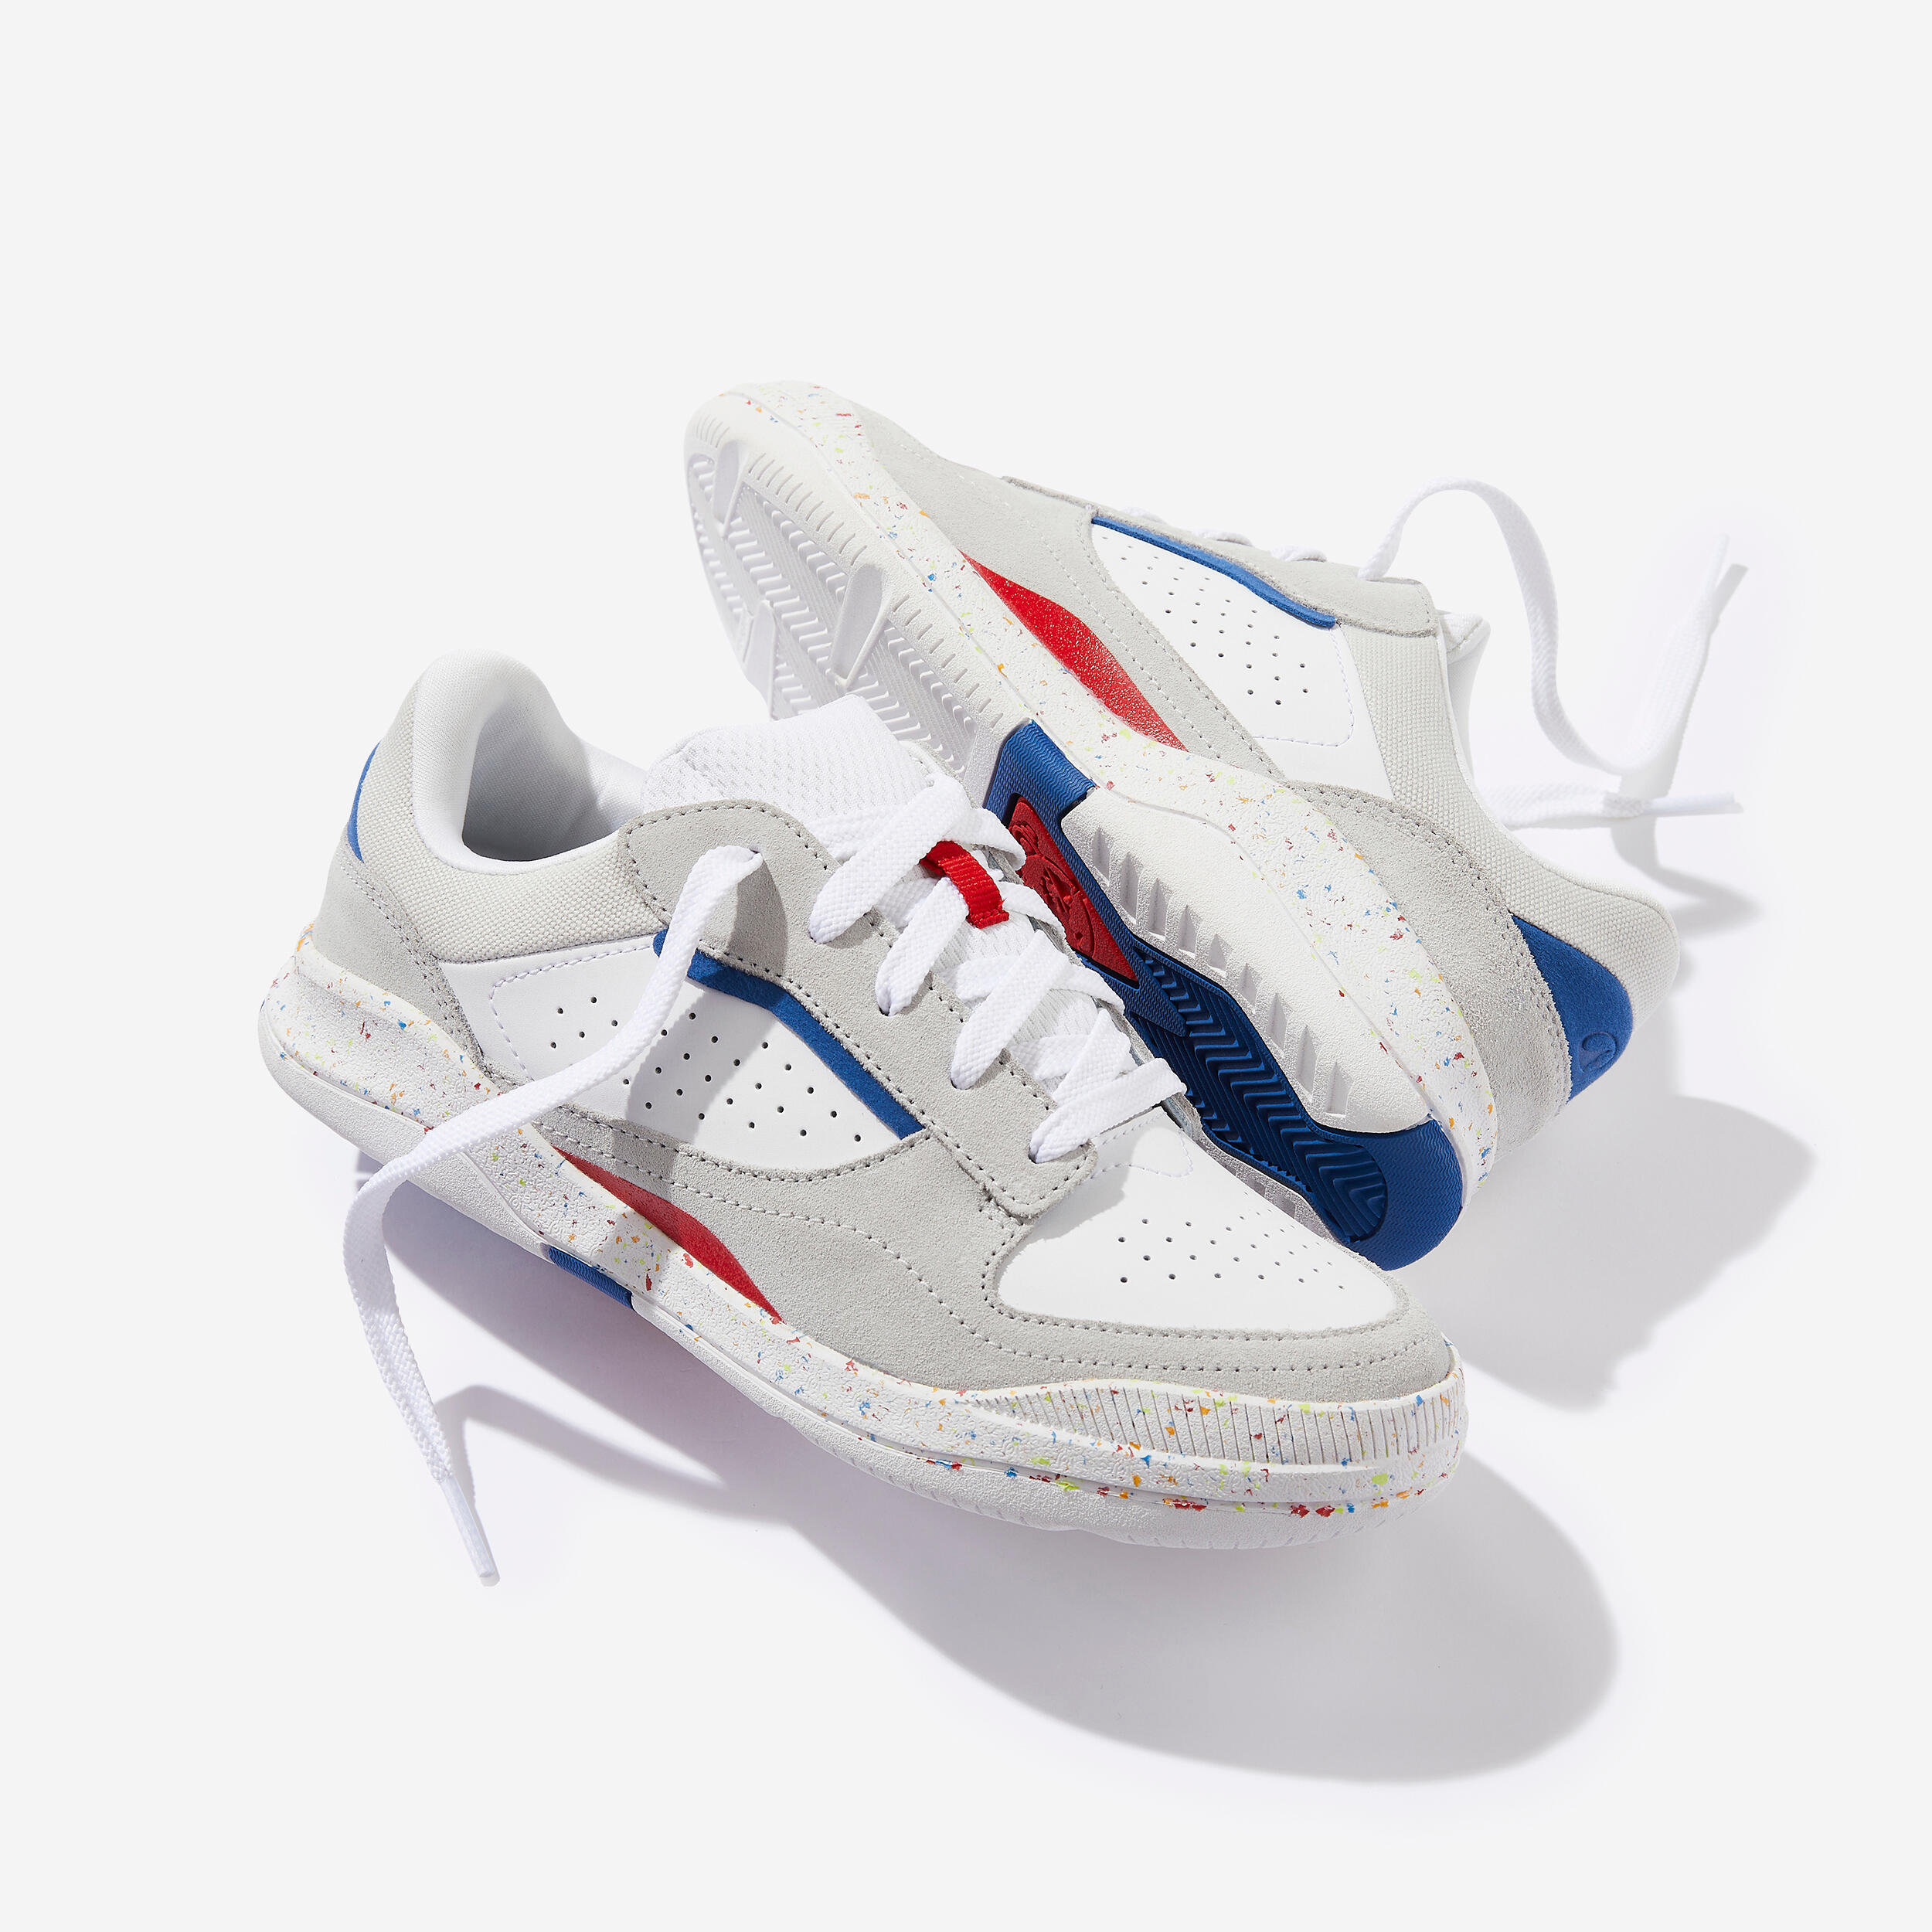 Kids' Lace-Up Shoes Playventure City - Blue/White/Red 2/9